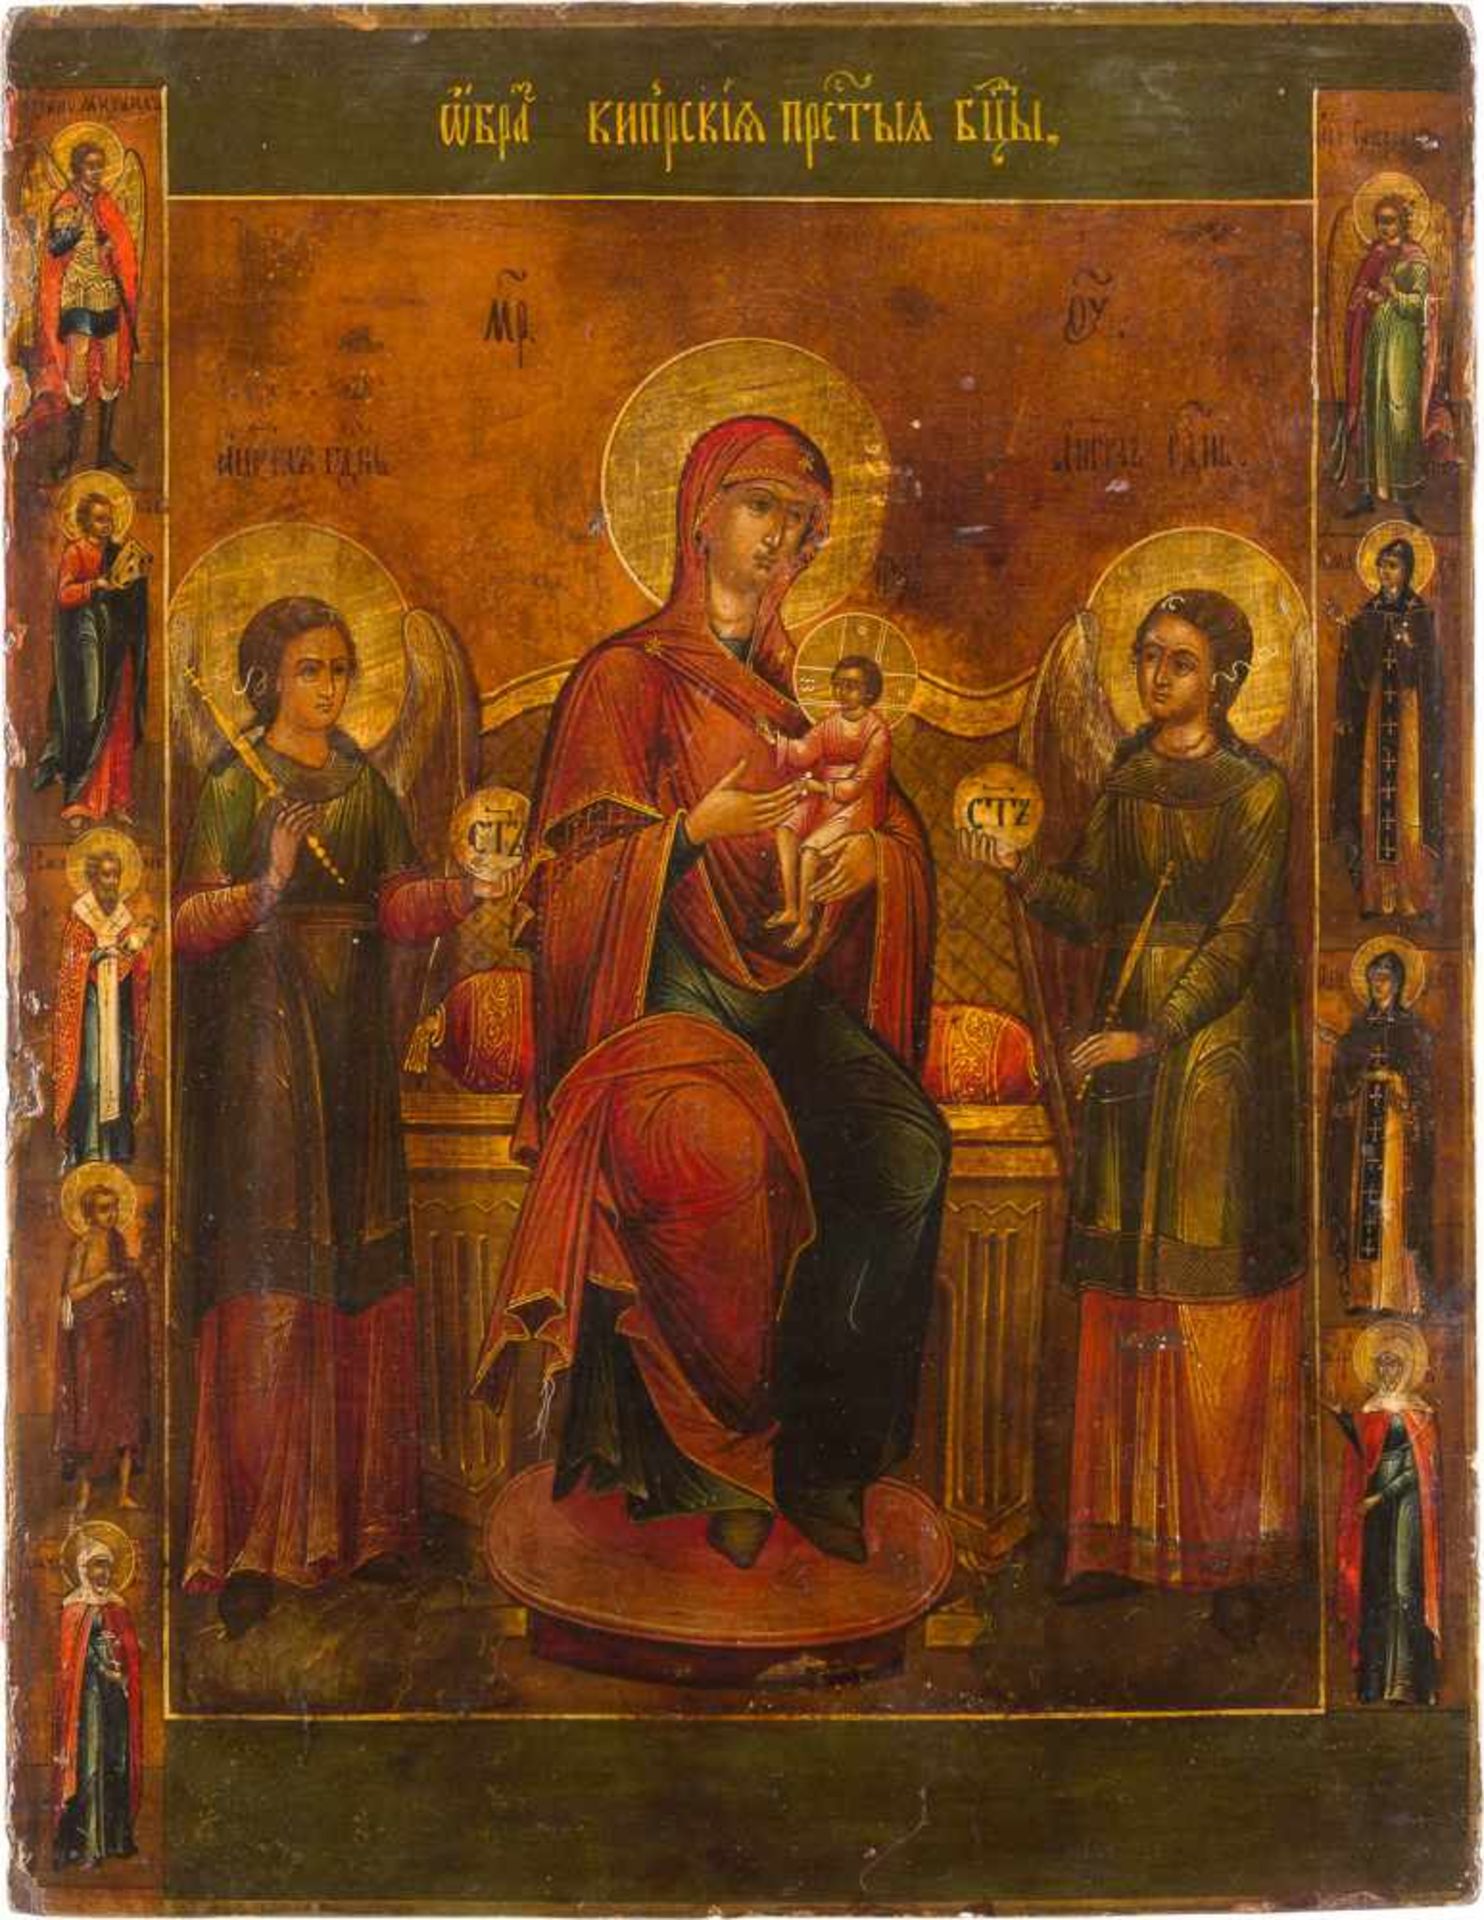 A LARGE ICON SHOWING THE 'KIPRSKAYA' MOTHER OF GOD